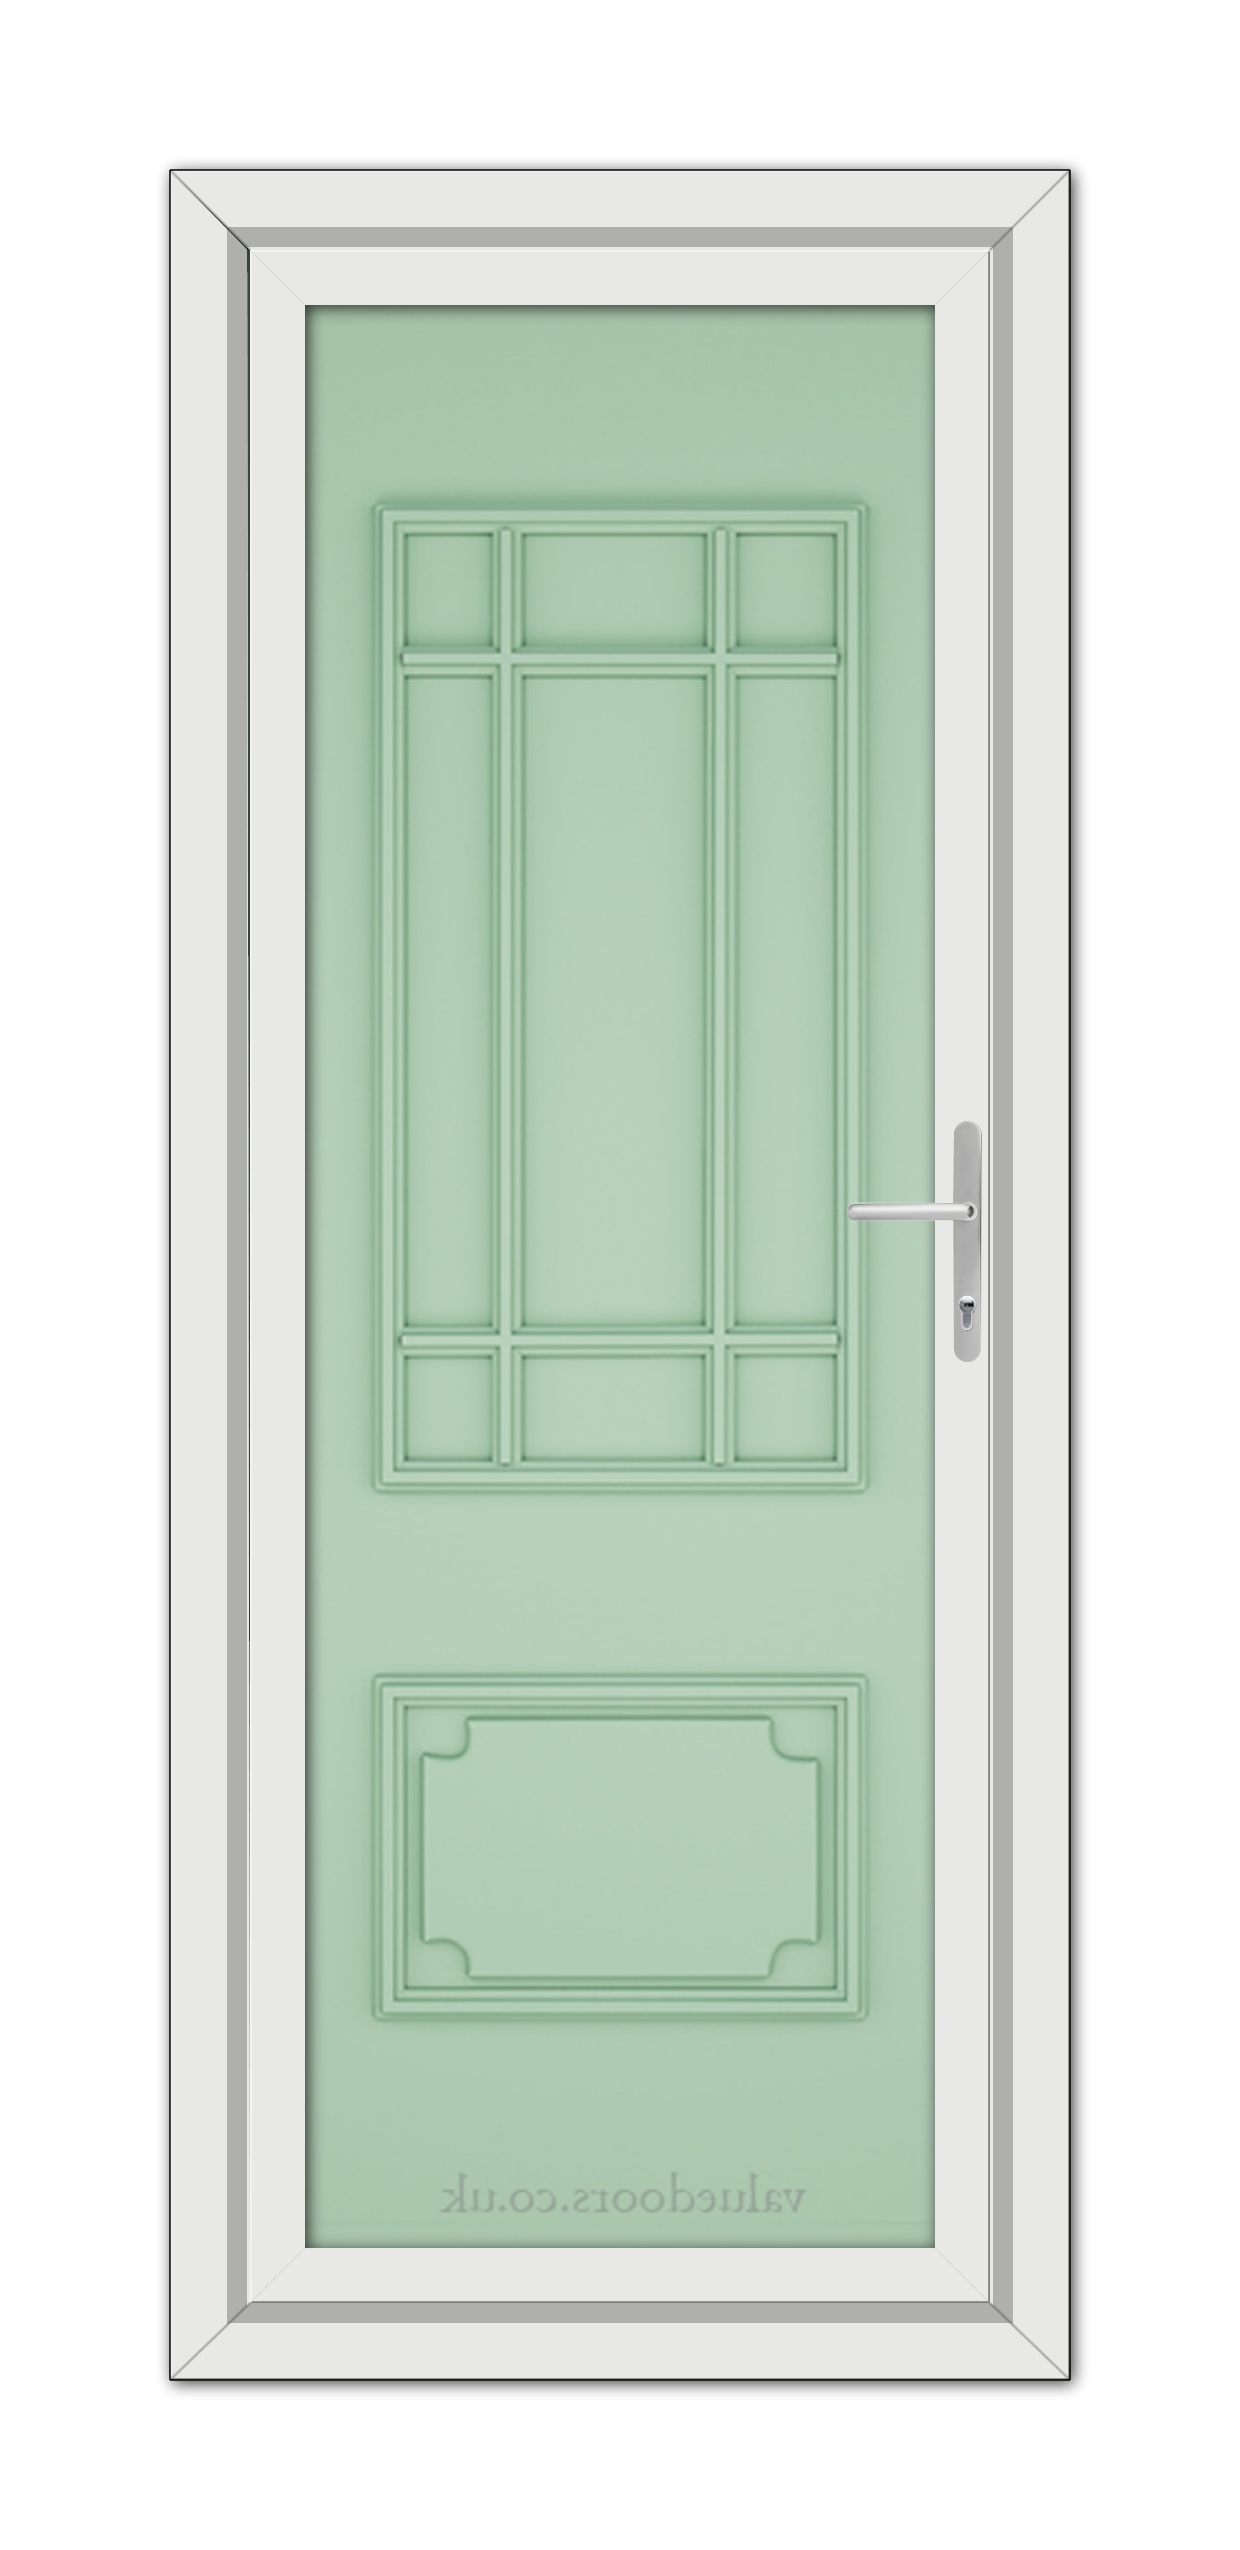 A Chartwell Green Winslow 1 Composite Door 48mm Timber Core with geometric panels and a silver handle, set within a white frame.